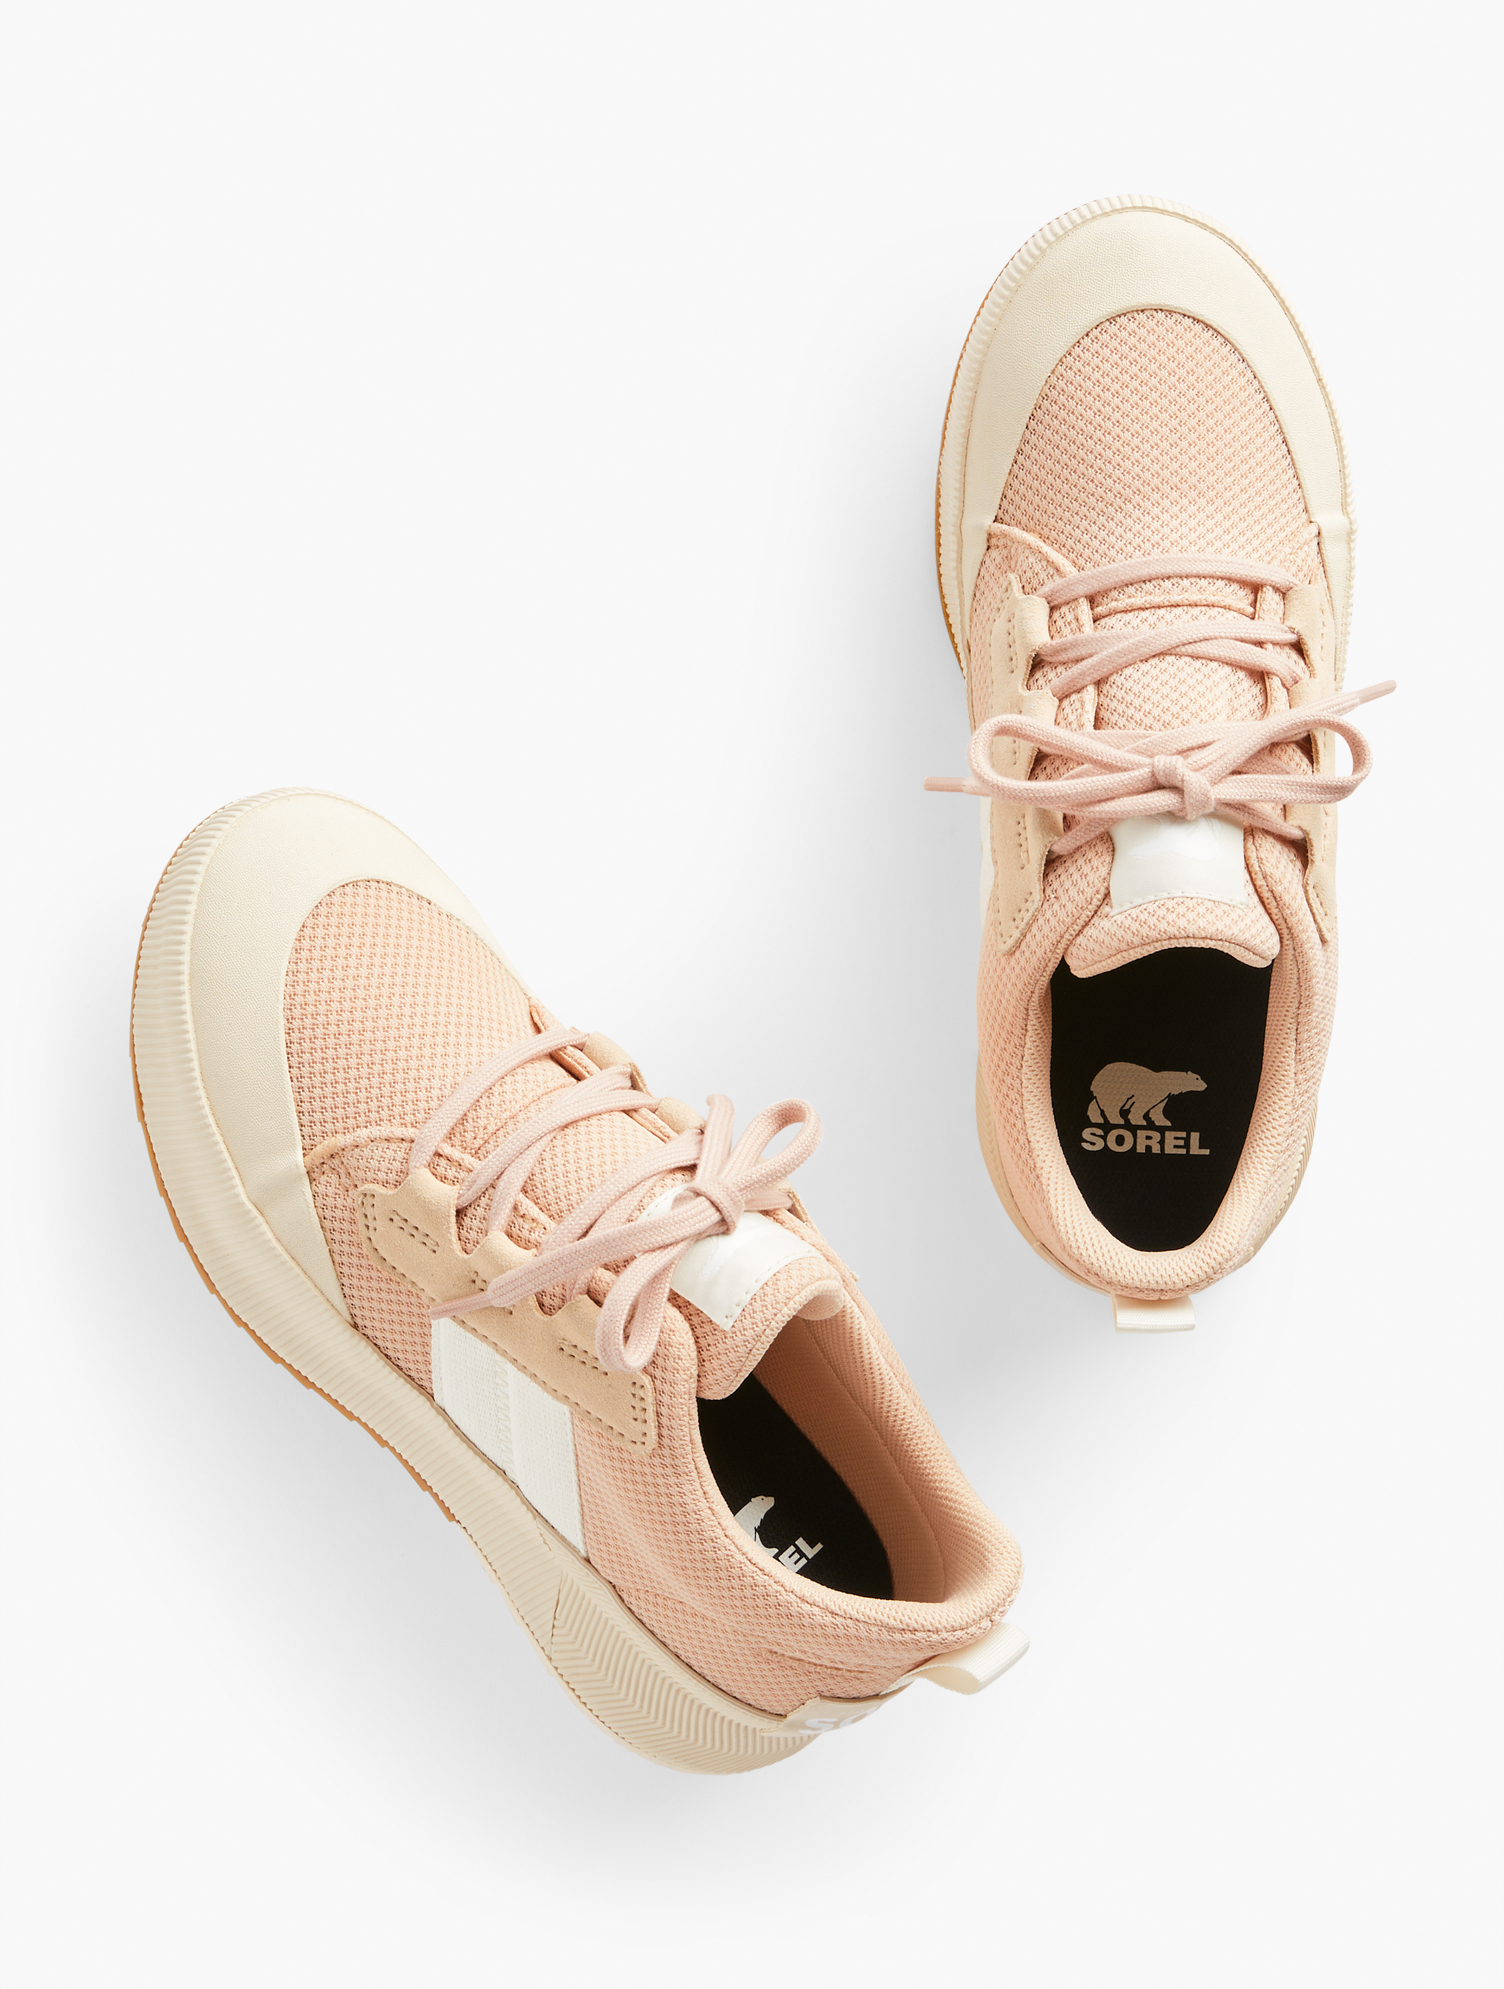 Talbots Out N Aboutâ¢ Waterproof Sneakers - Nova Sand/chalk - 8m  In Nova Sand,chalk